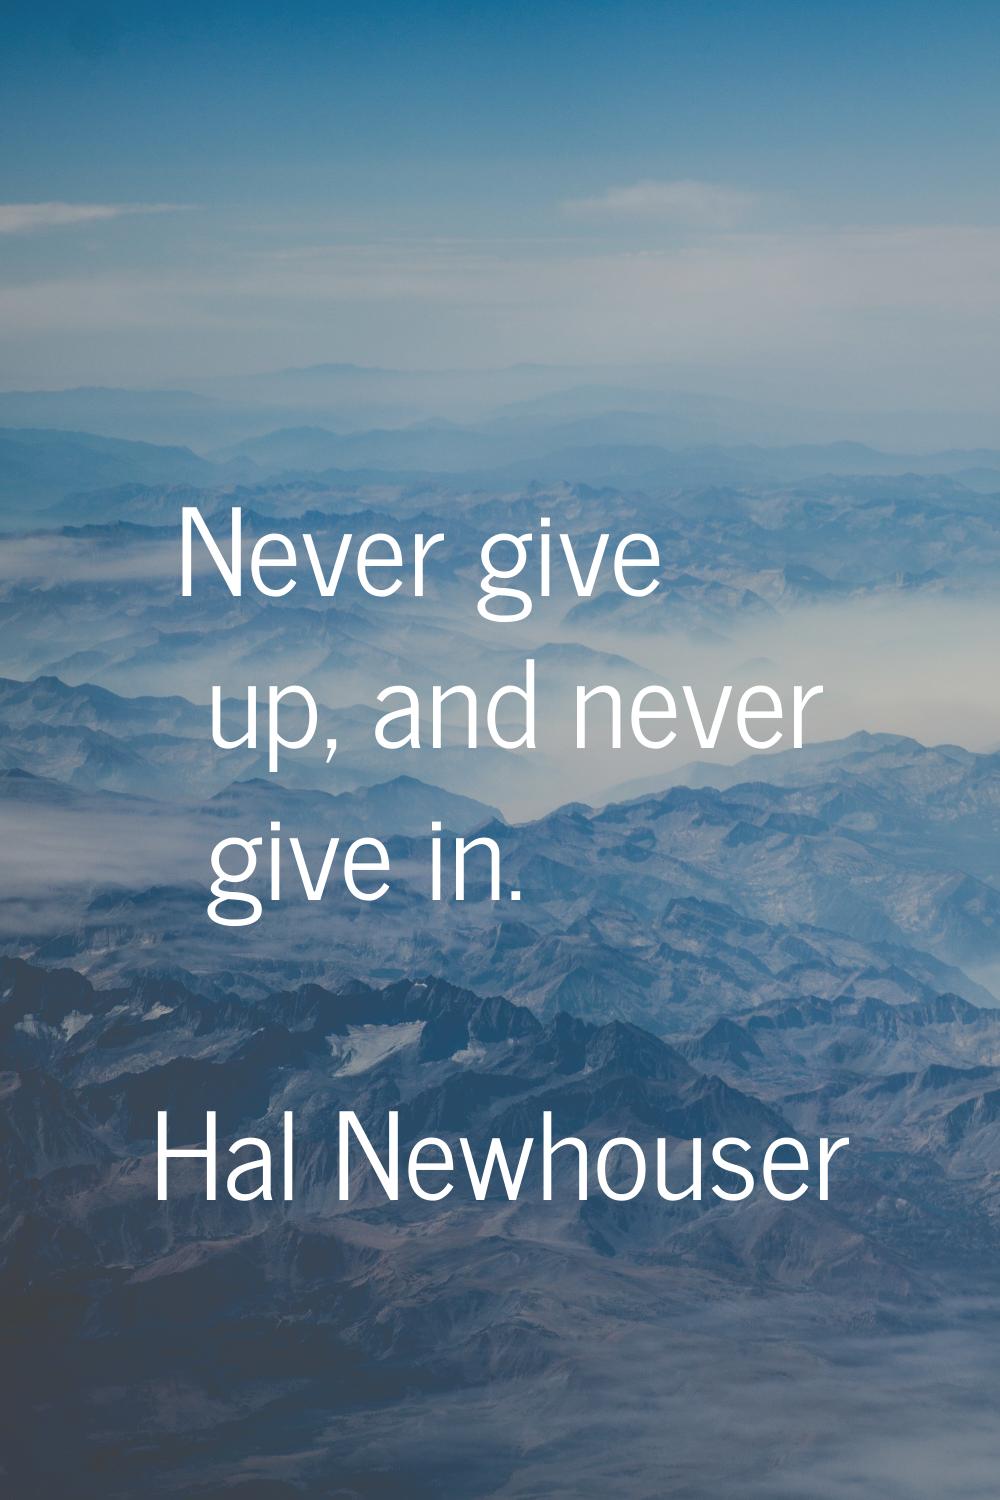 Never give up, and never give in.